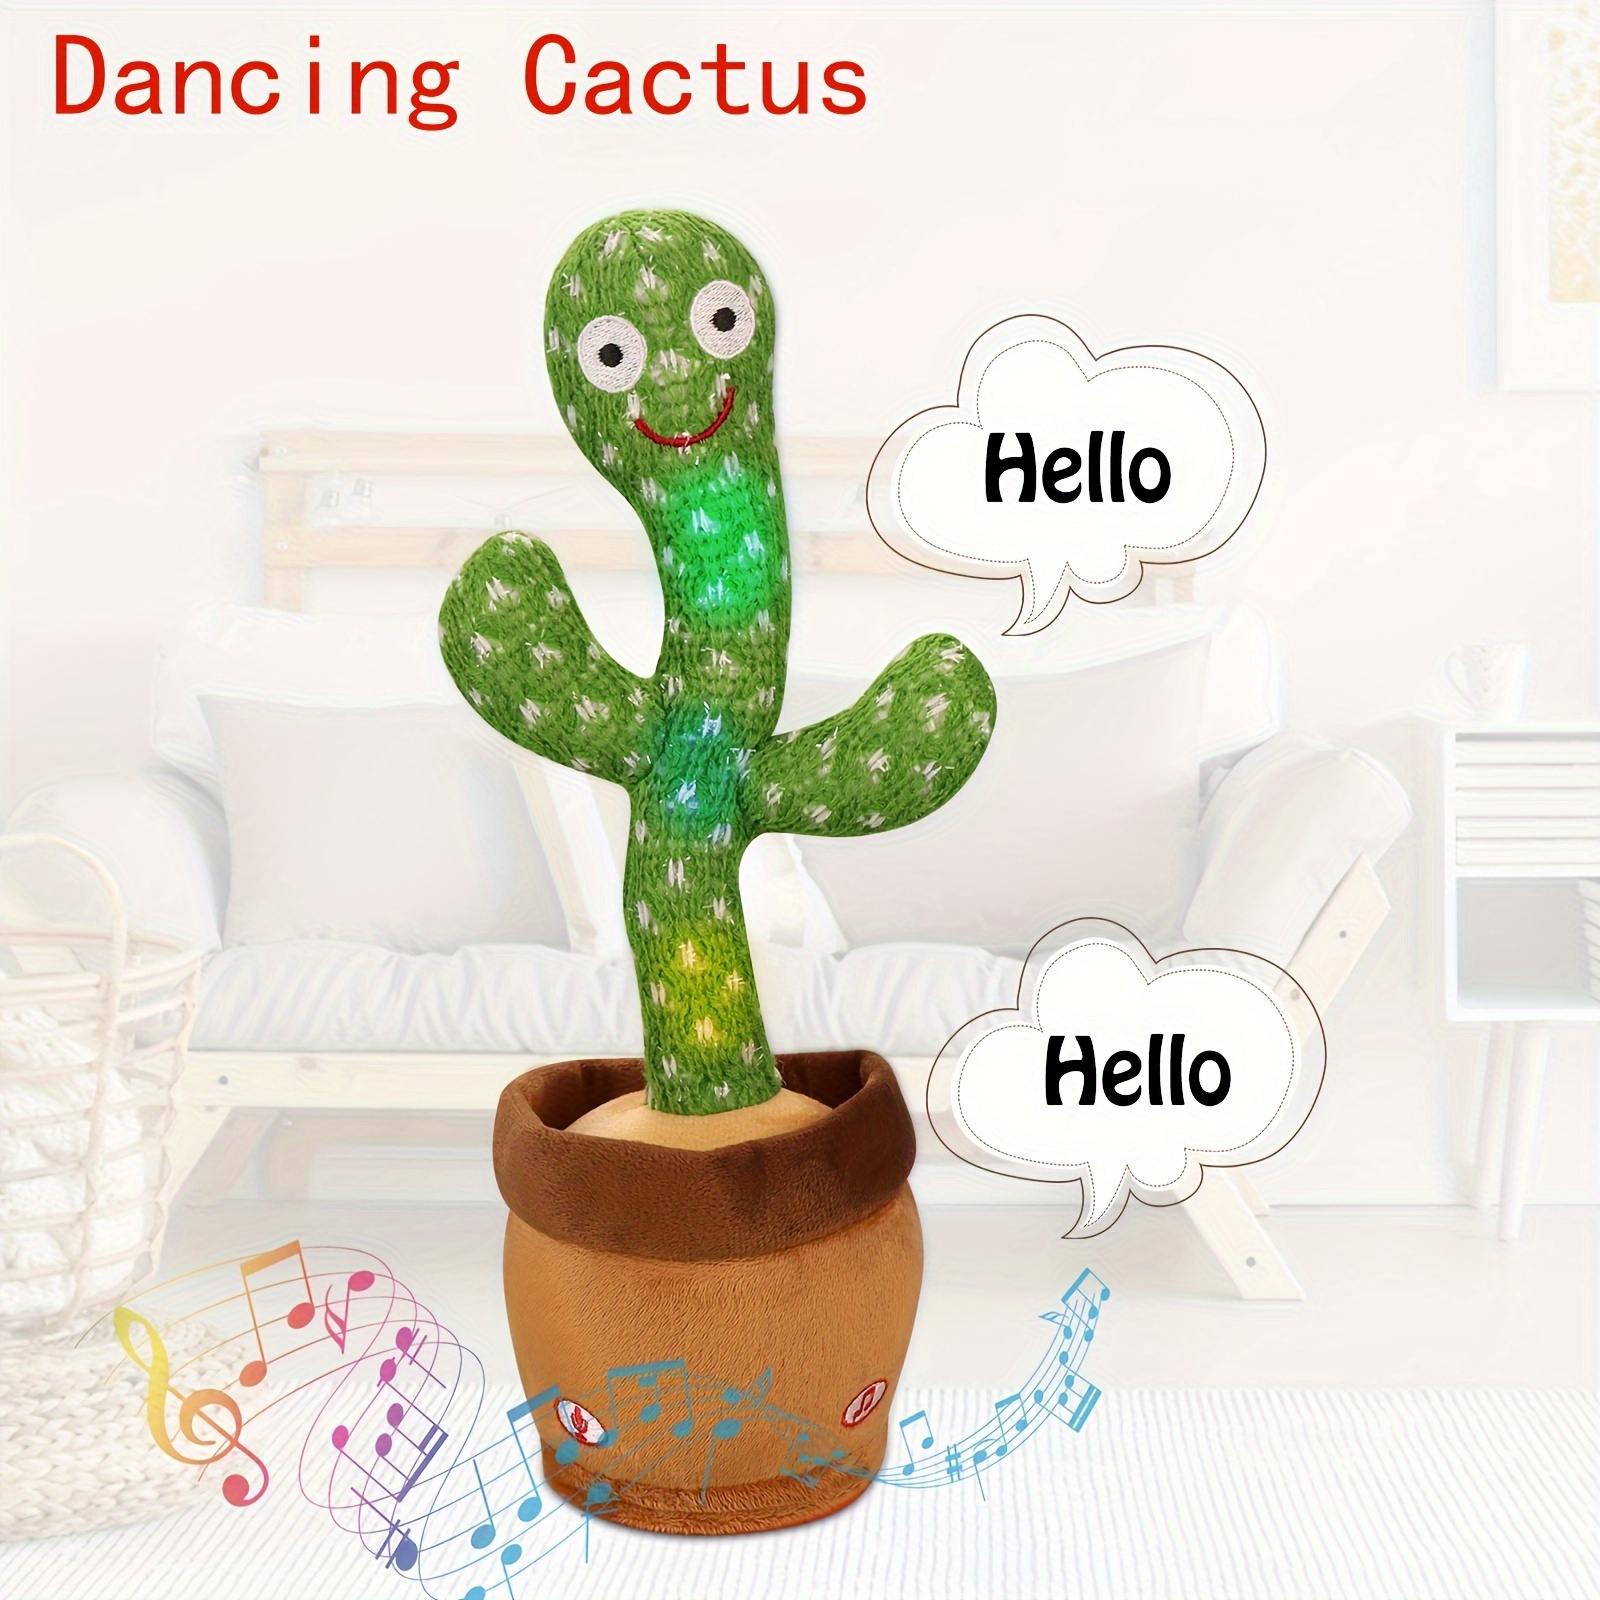 

Cactus Can Glow Can Learn To Talk And Sing Cactus Sand Sculpture Cactus Twist Cactus Pet Dog Toy Fun Cat Toy Christmas Thanksgiving Gift (without Batteries)